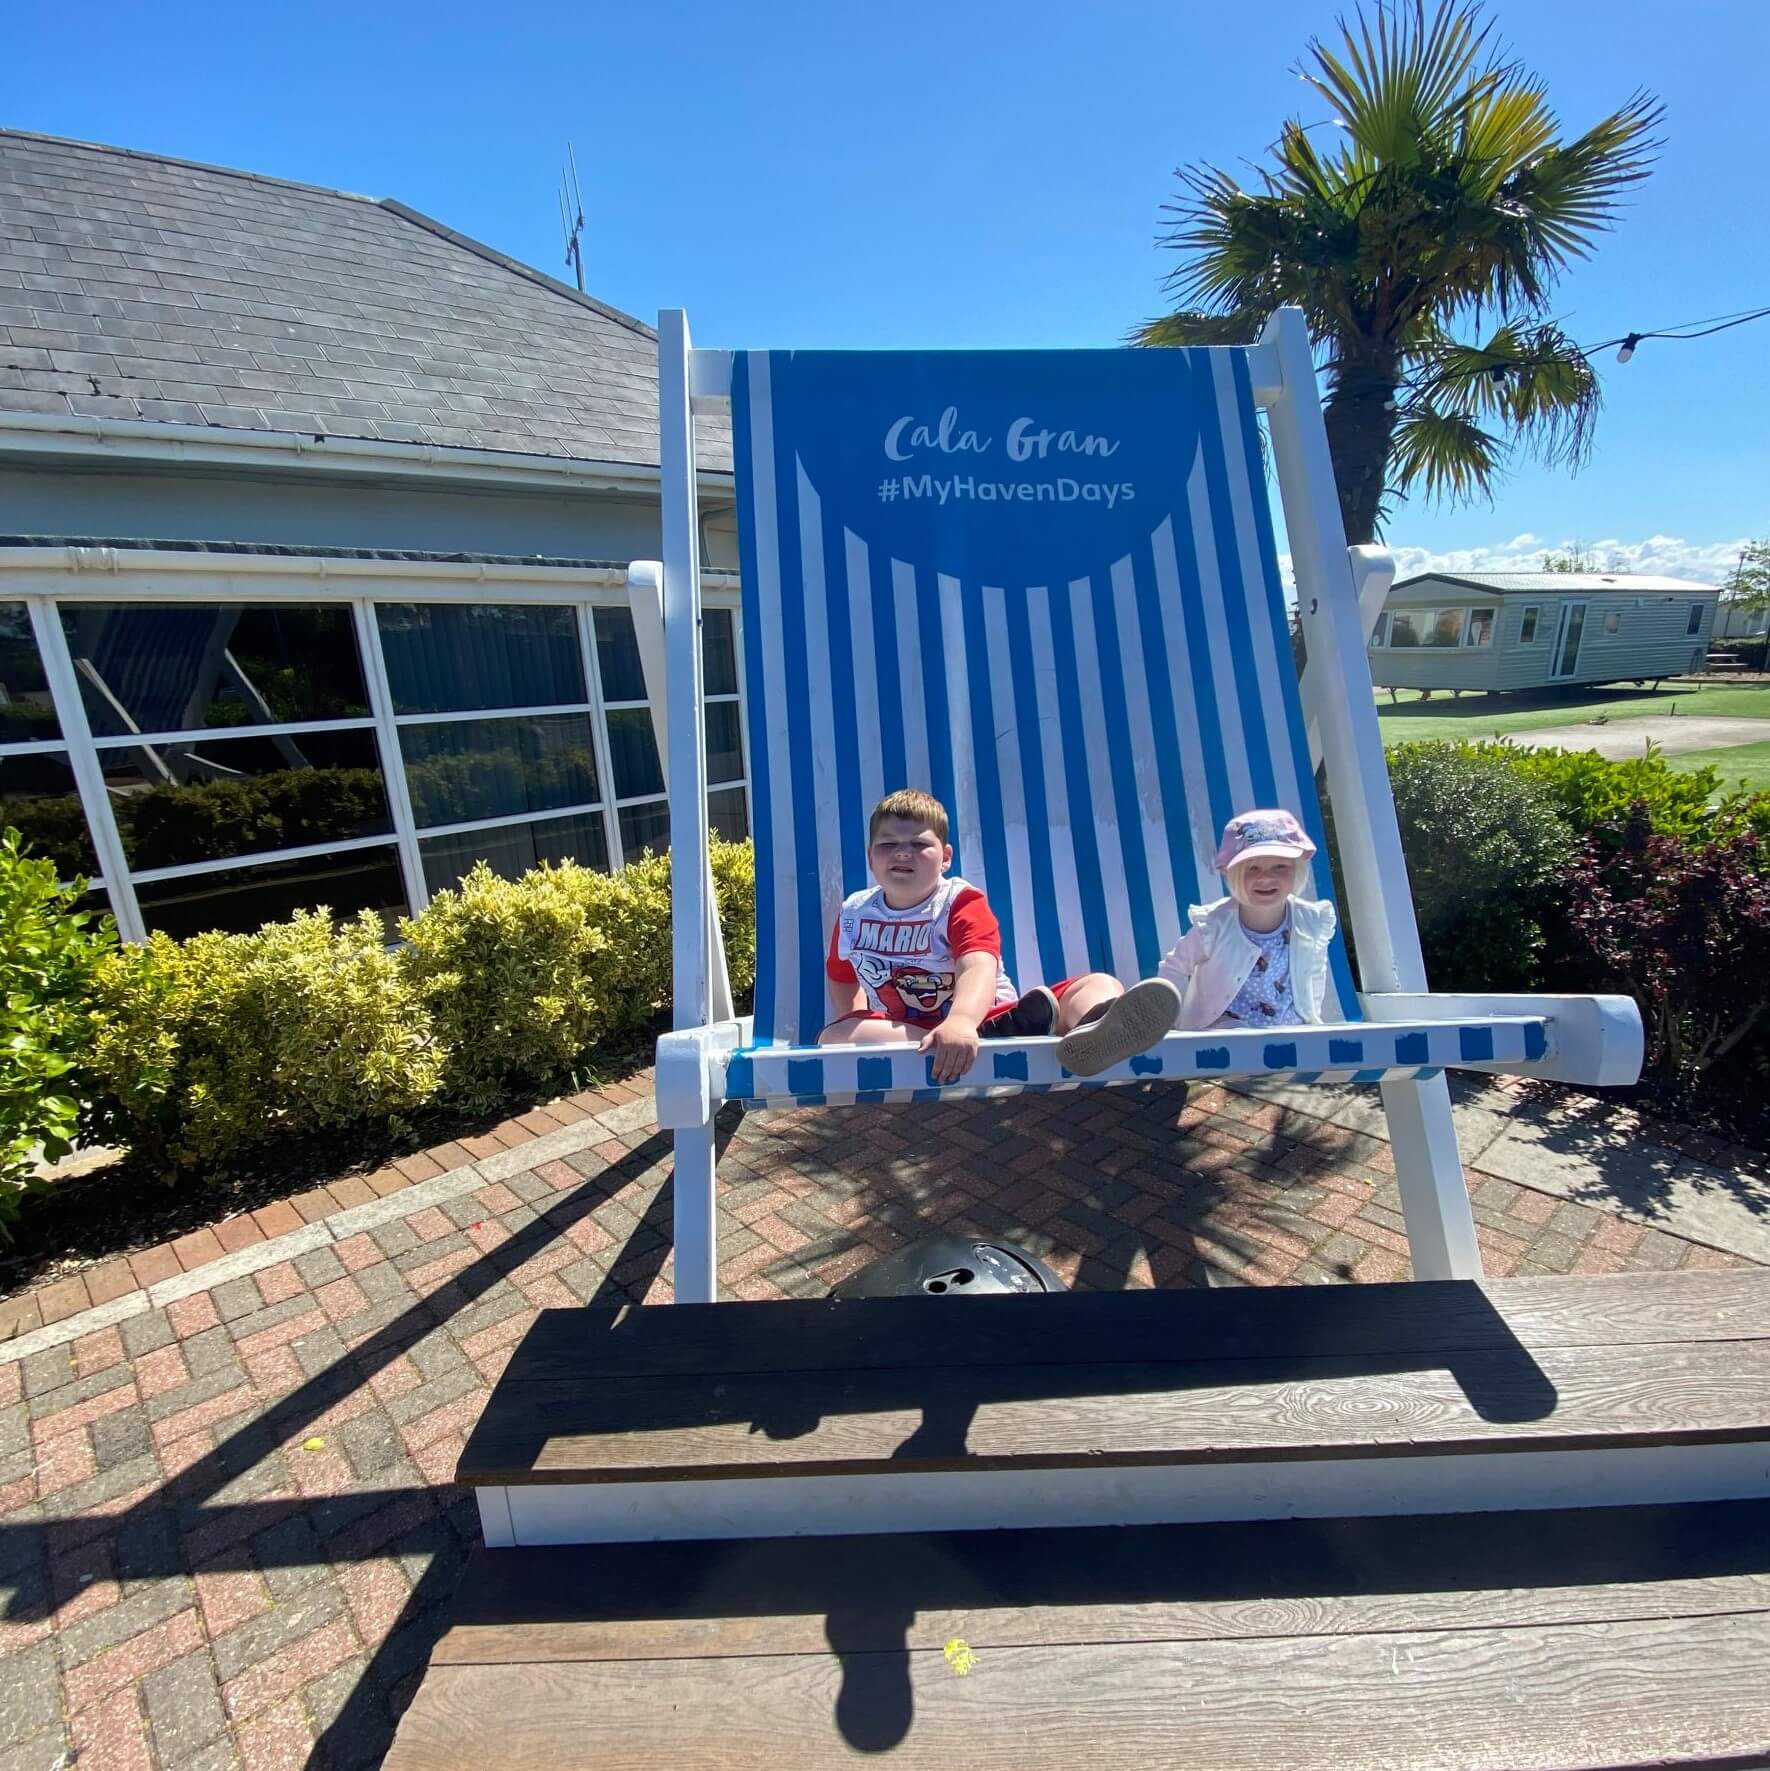 Two young children in a large deckchair whilst on holiday.